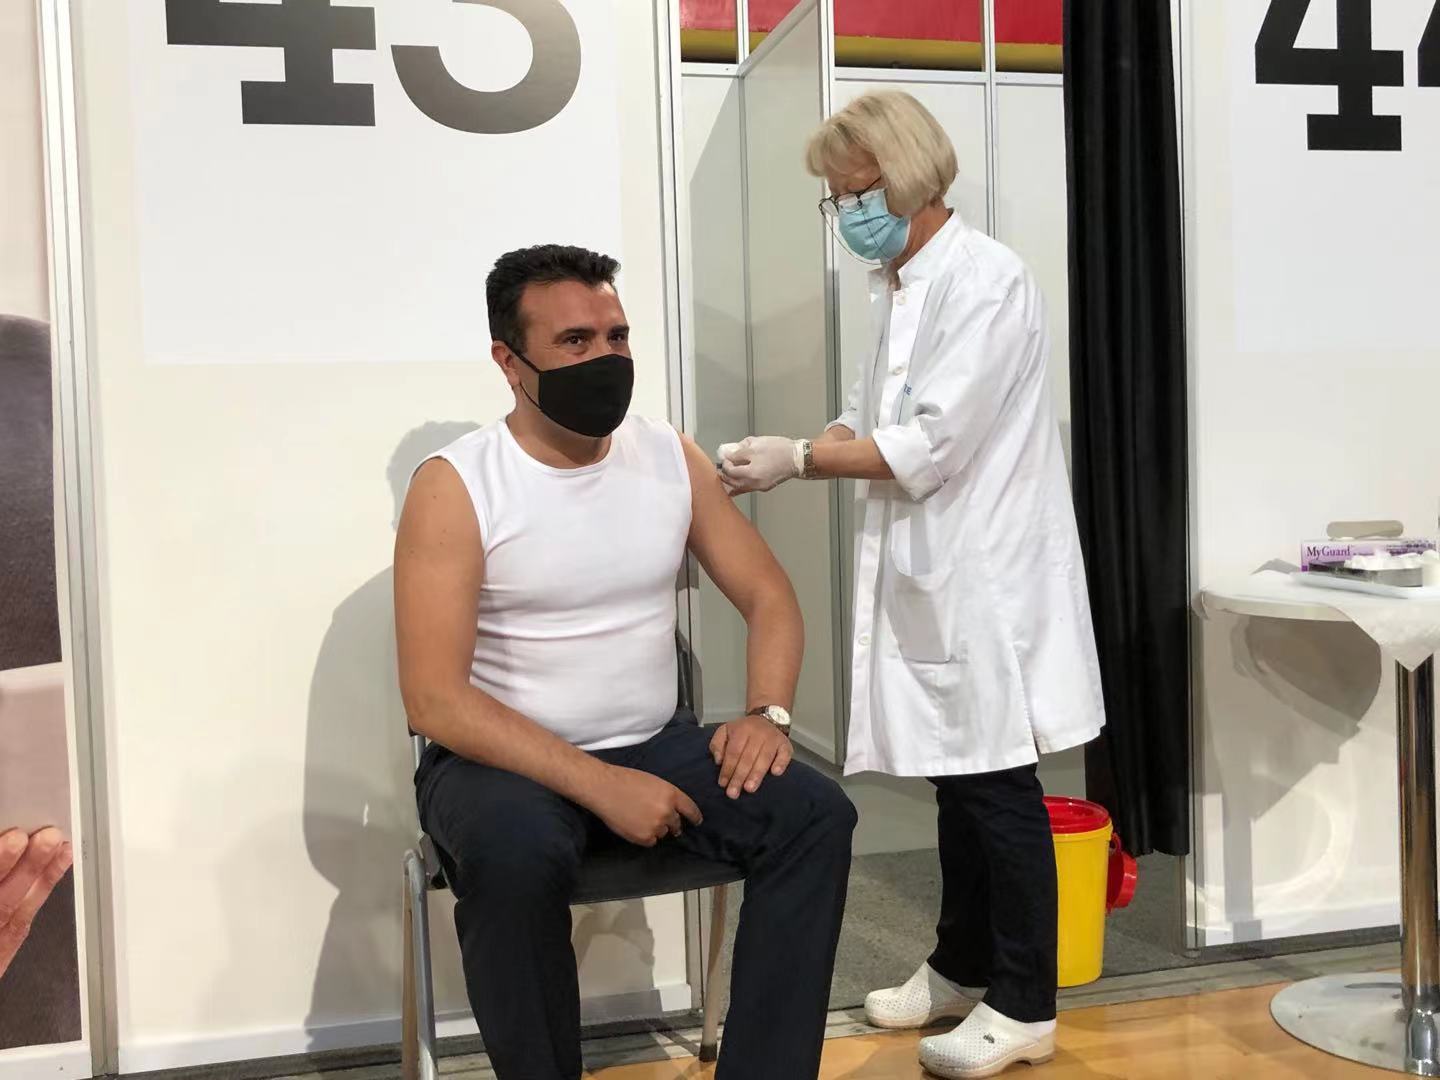 North Macedonian Prime Minister Zaev received the first dose of the SinoVac vaccine